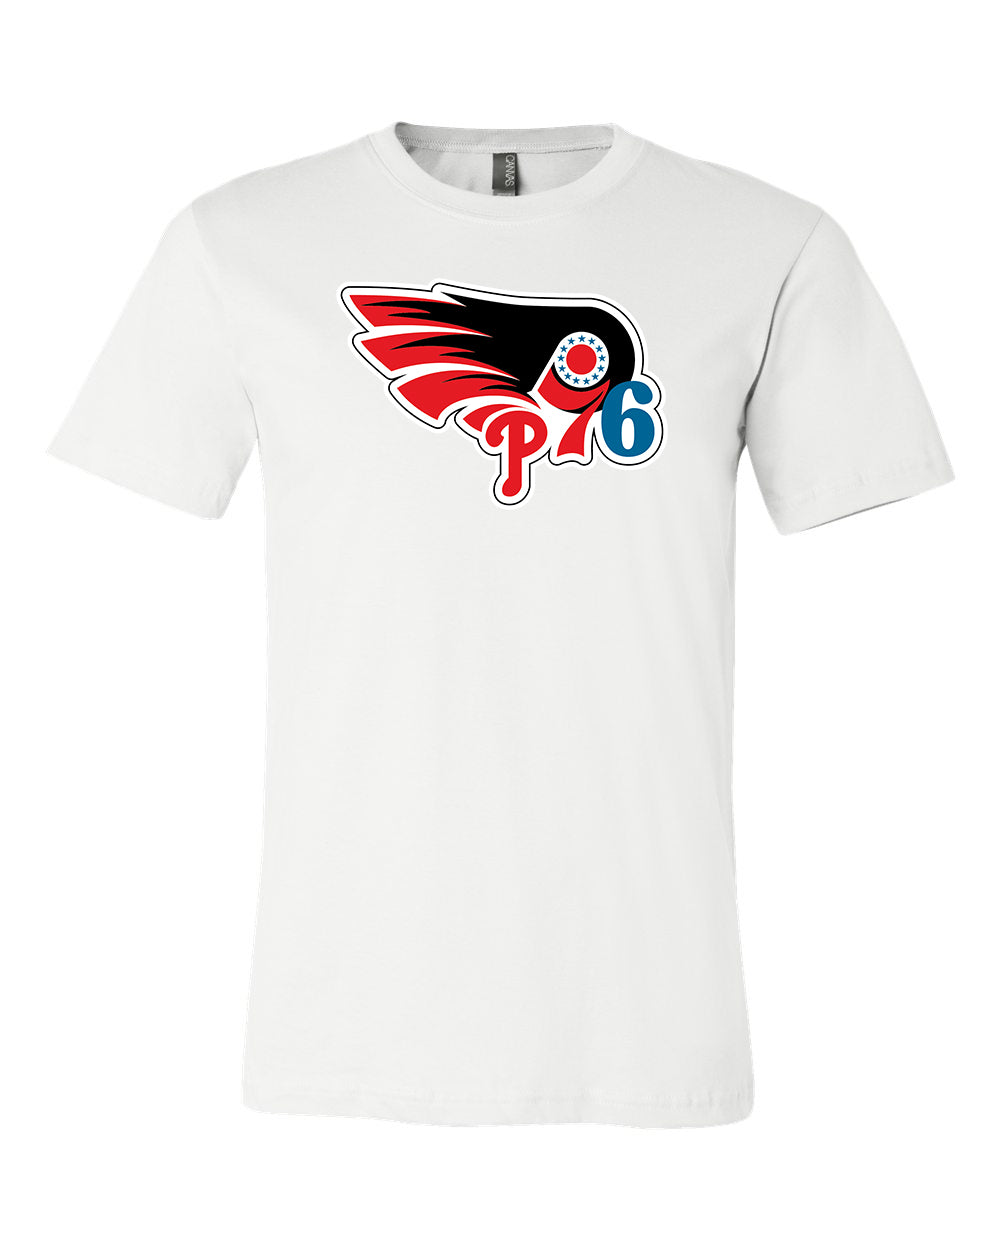 Design philadelphia eagles phillies flyers and 76ers city of